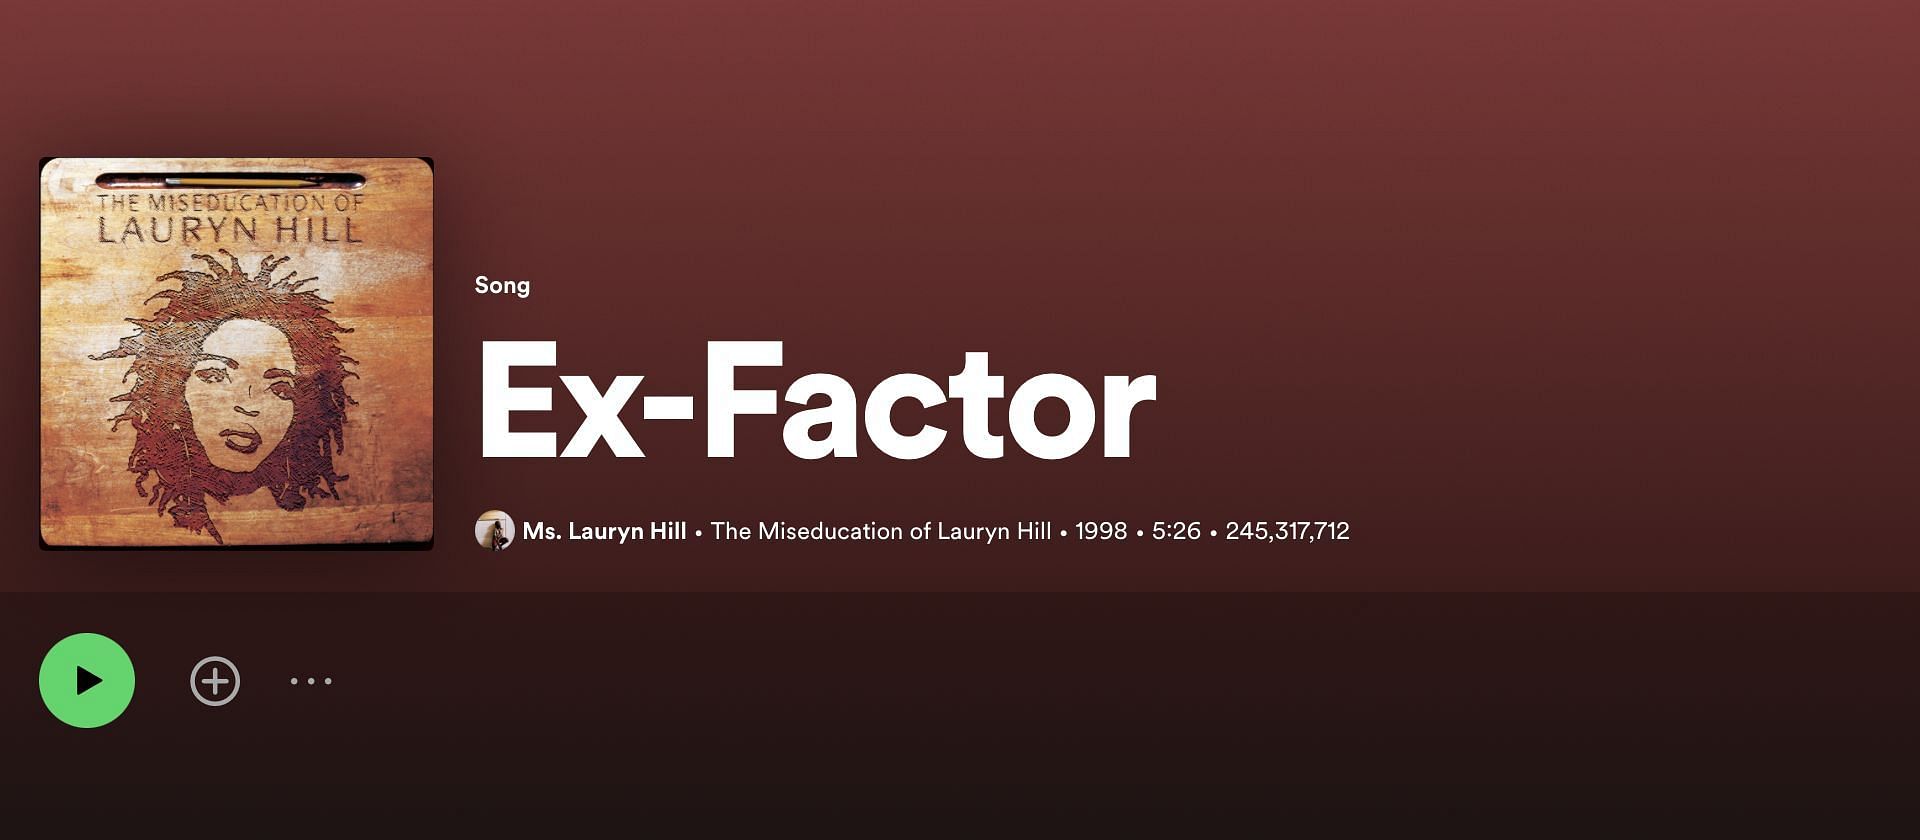 Track 3 of Lauryn&#039;s debut album &#039;The Miseducation of Lauryn Hill&#039; (Image via Spotify)